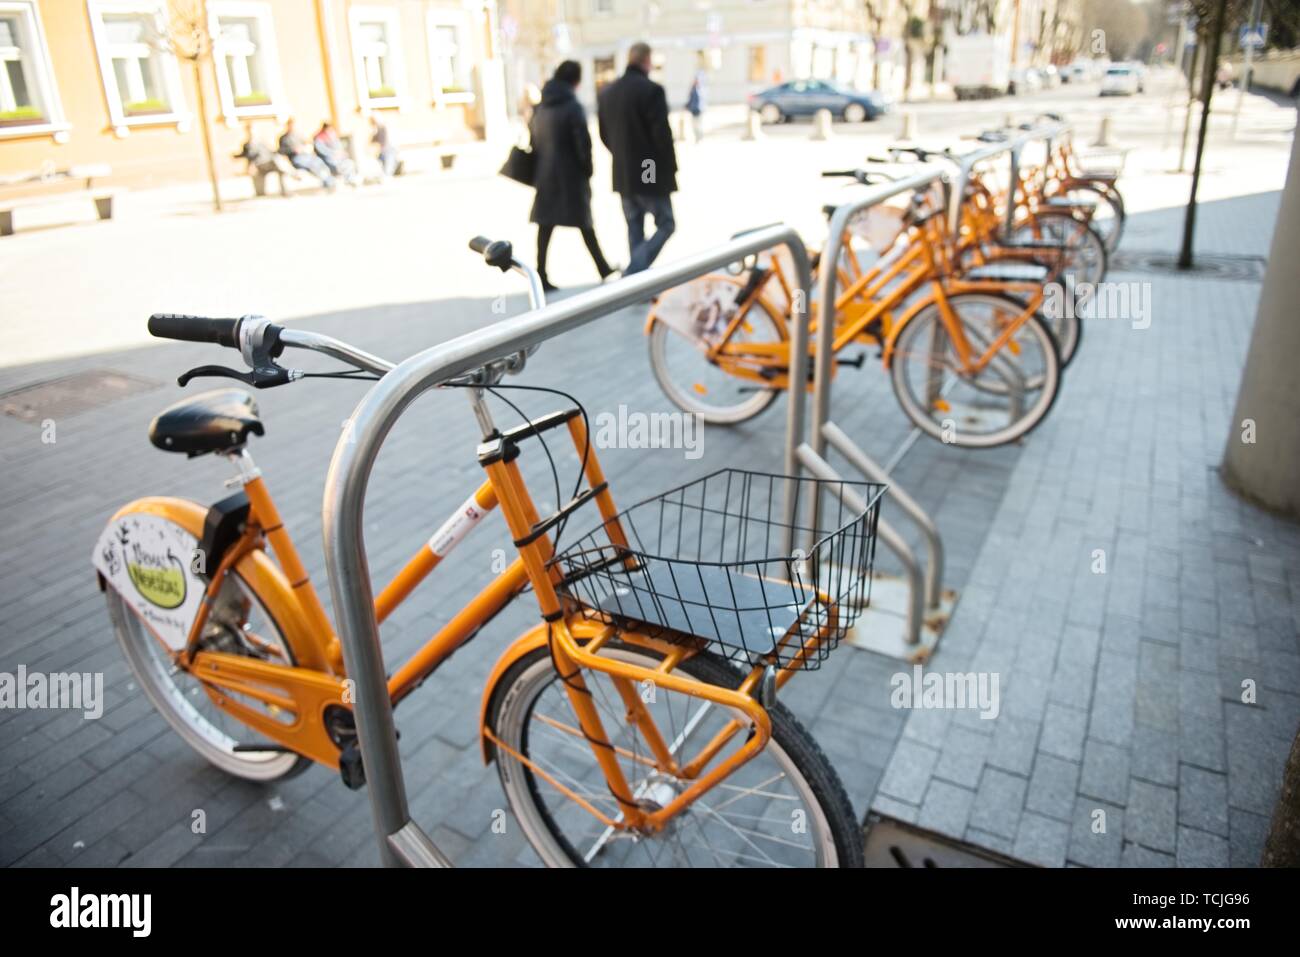 Kaunas, Lithuania, May 19, 2016: Shared bikes are lined up in the streets of Kaunas. CityBee station. Stock Photo